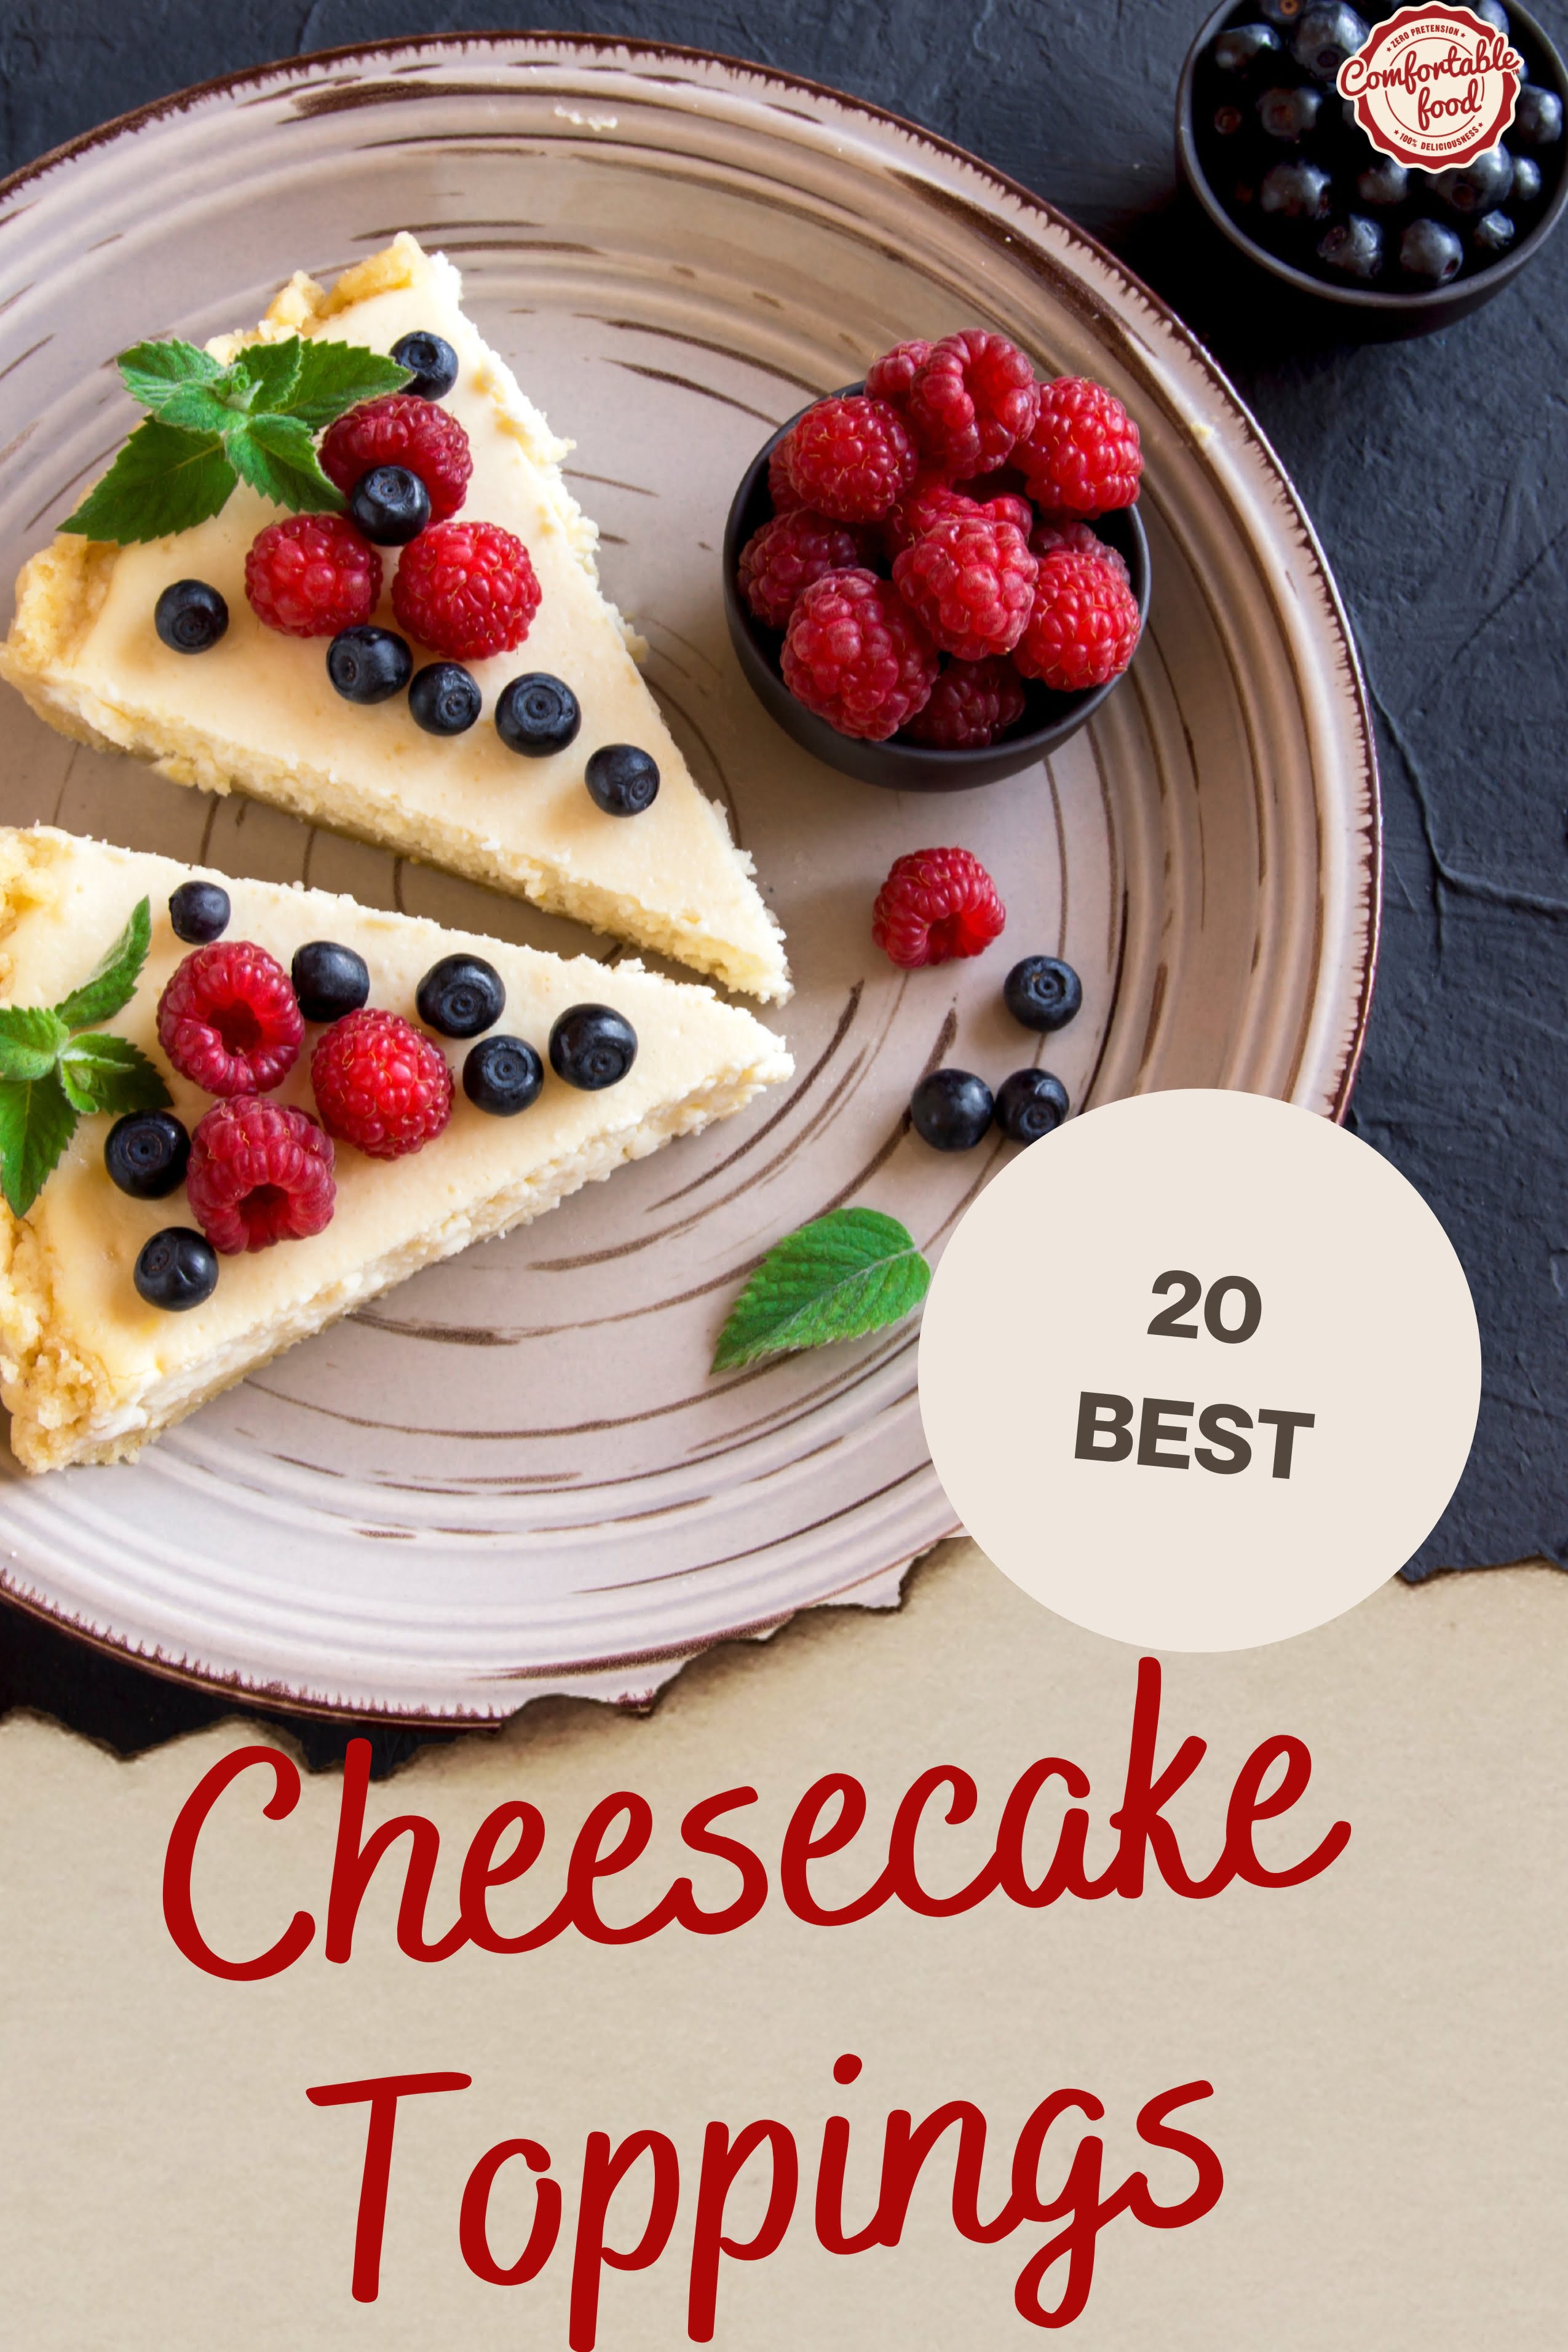 20 best cheesecake toppings - socials